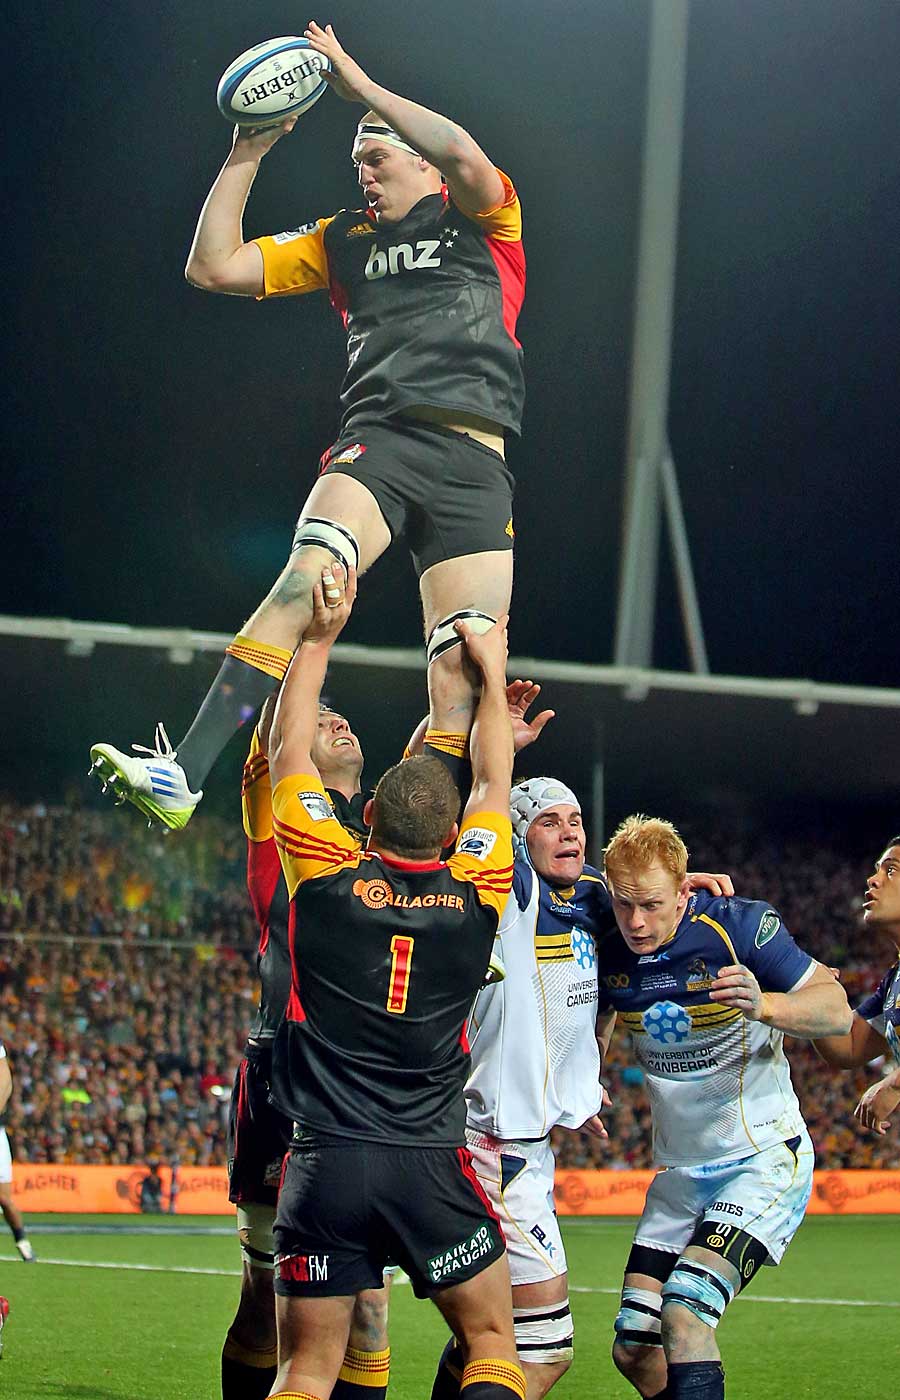 The Chiefs' Brodie Retallick wins a lineout against the Brumbies